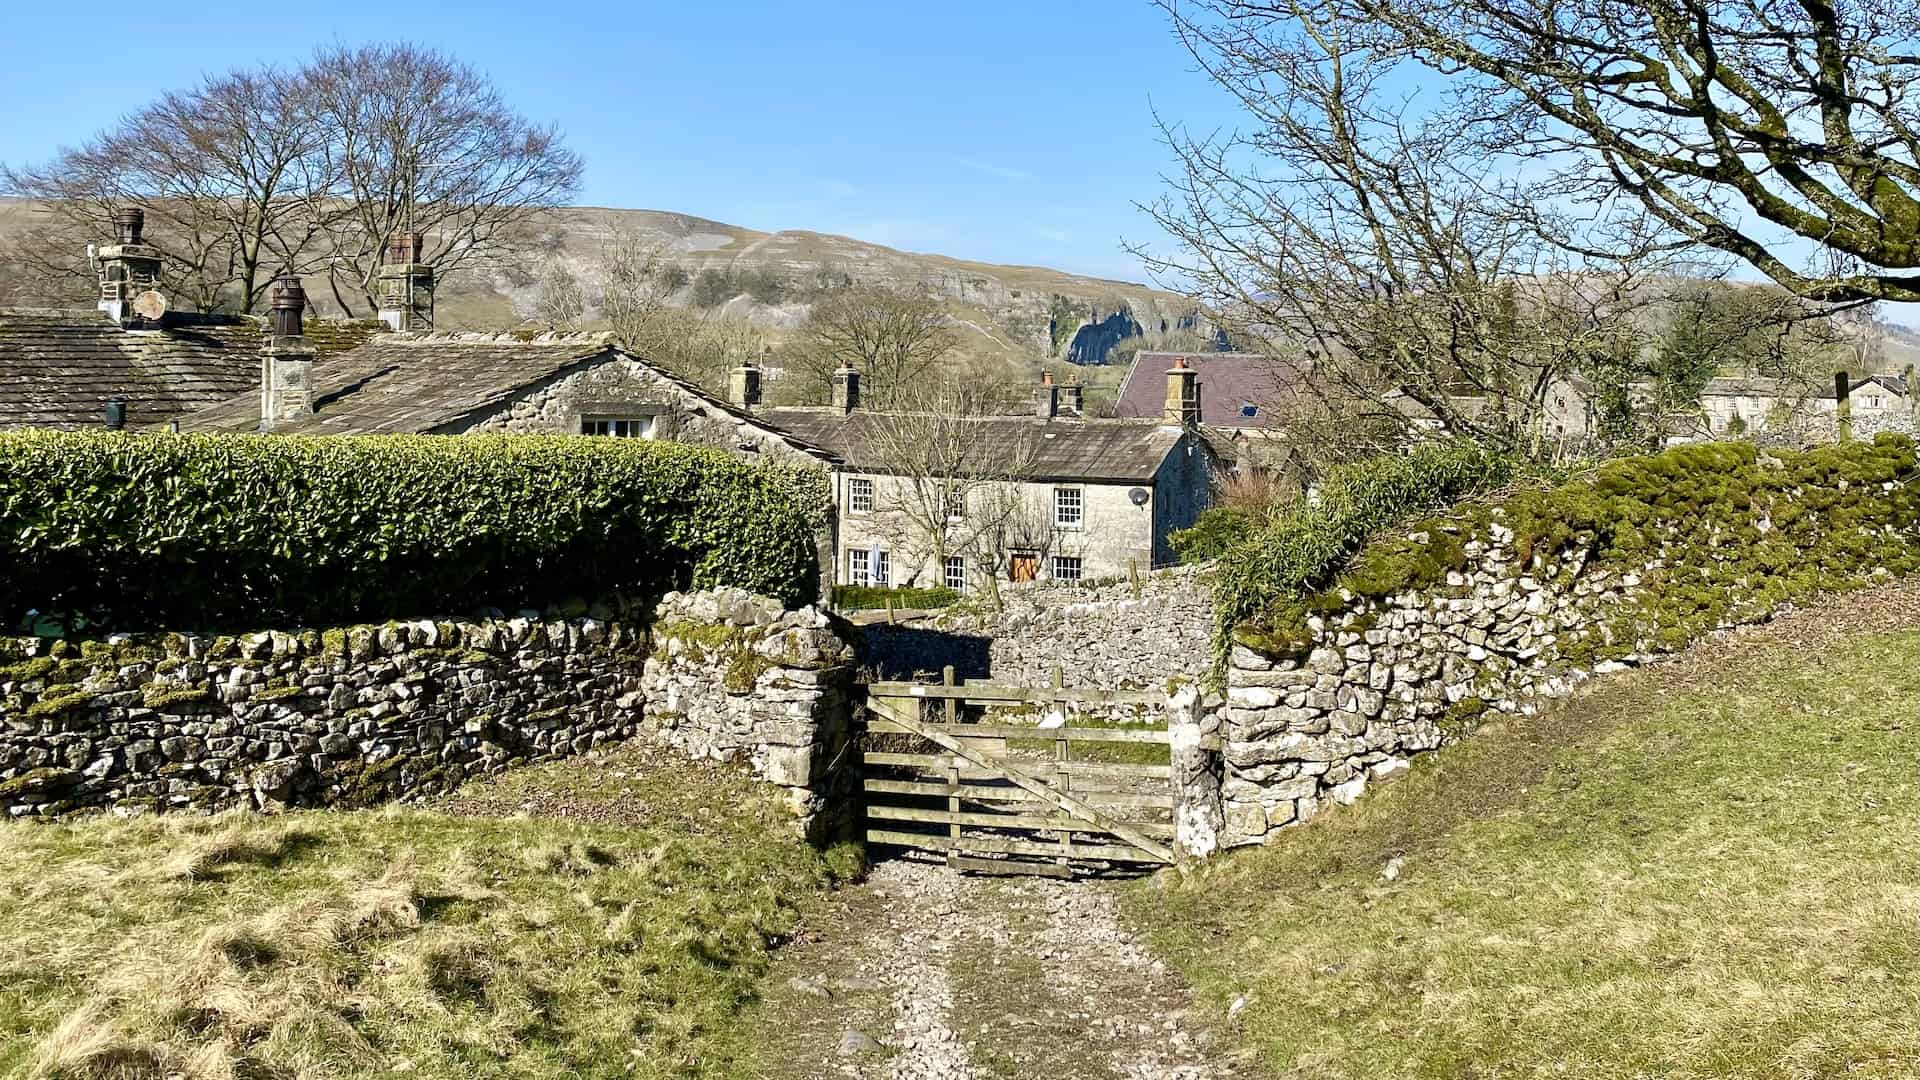 Countryside Code: Leave gates as you find them or follow instructions on signs.